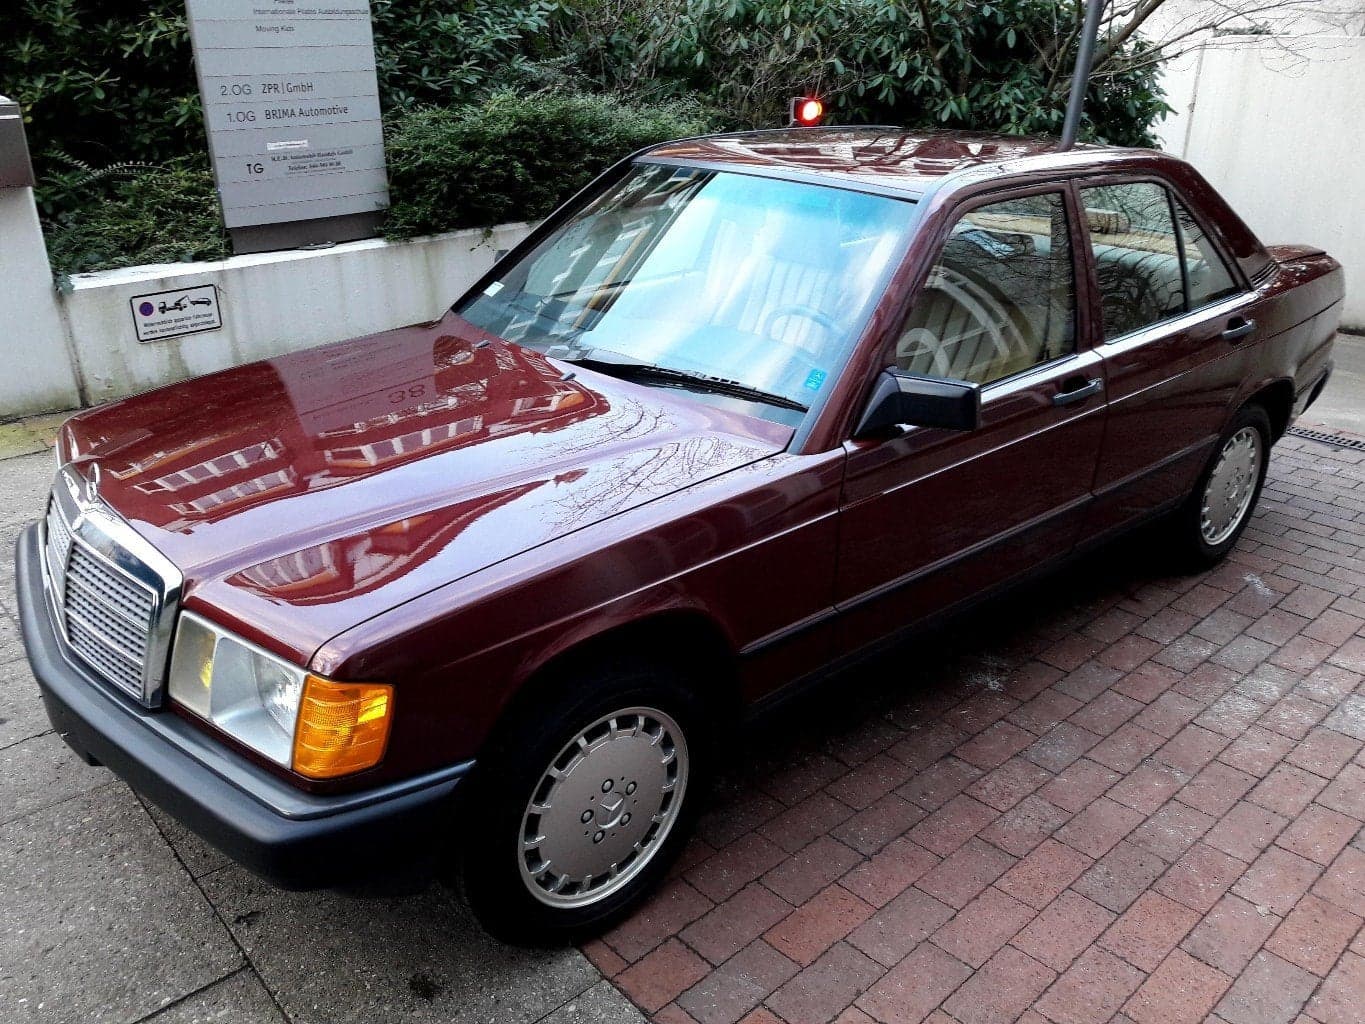 Would You Buy This Pristine 1986 Mercedes-Benz 190 E 2.3 or a Brand New E-Class?